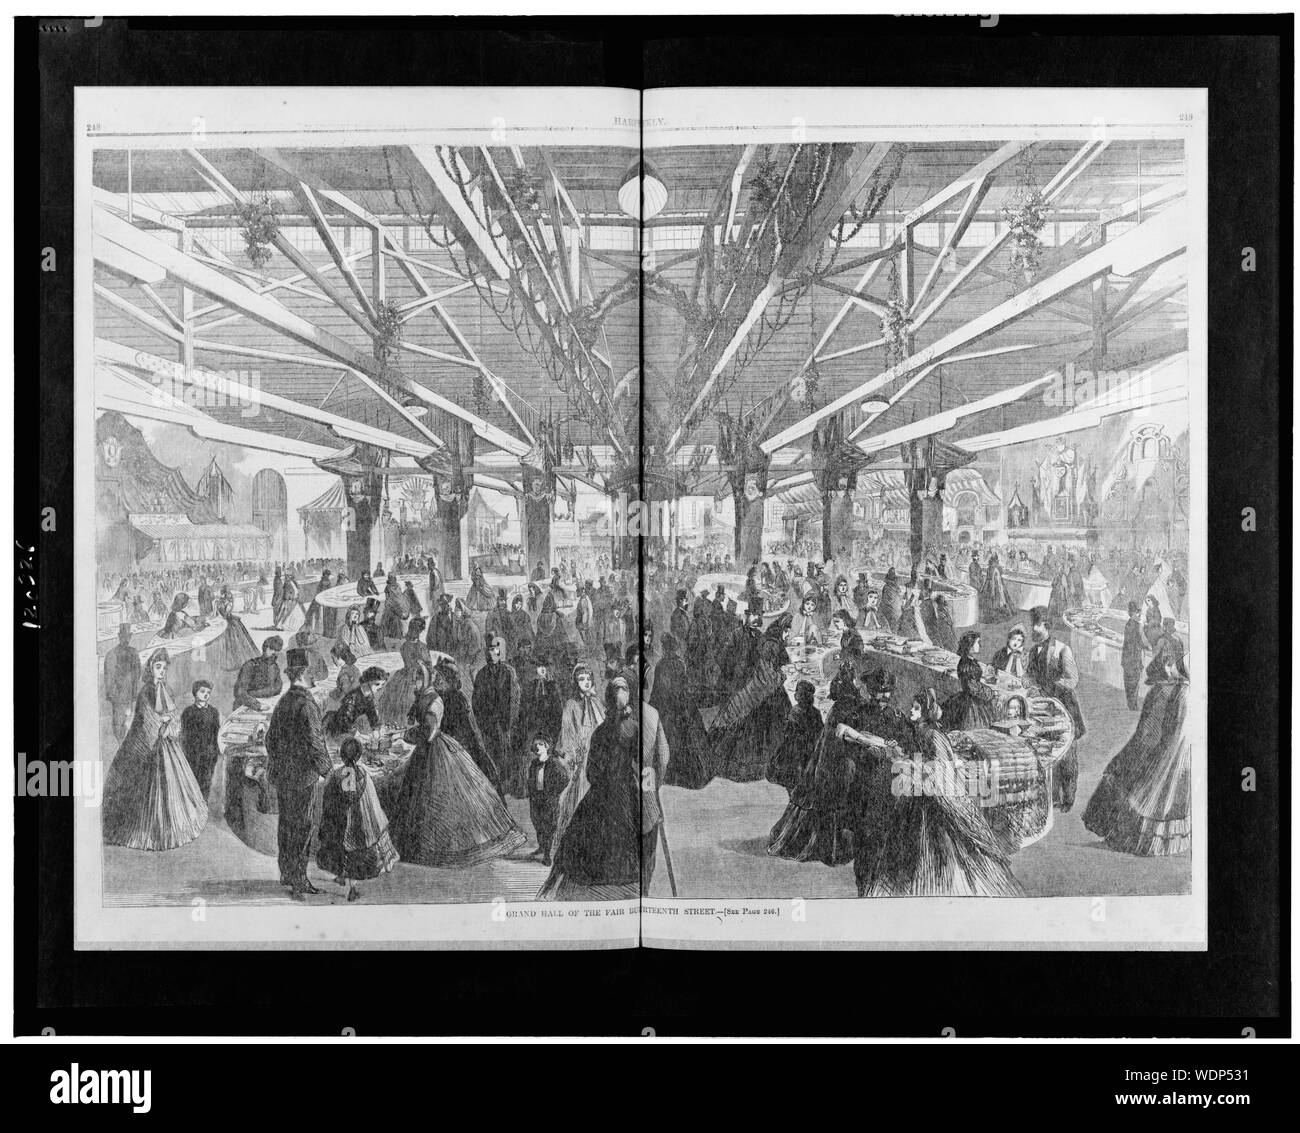 Grand hall of the fair building, Fourteenth Street Abstract/medium: 1 print (2 pages) : wood engraving. Stock Photo